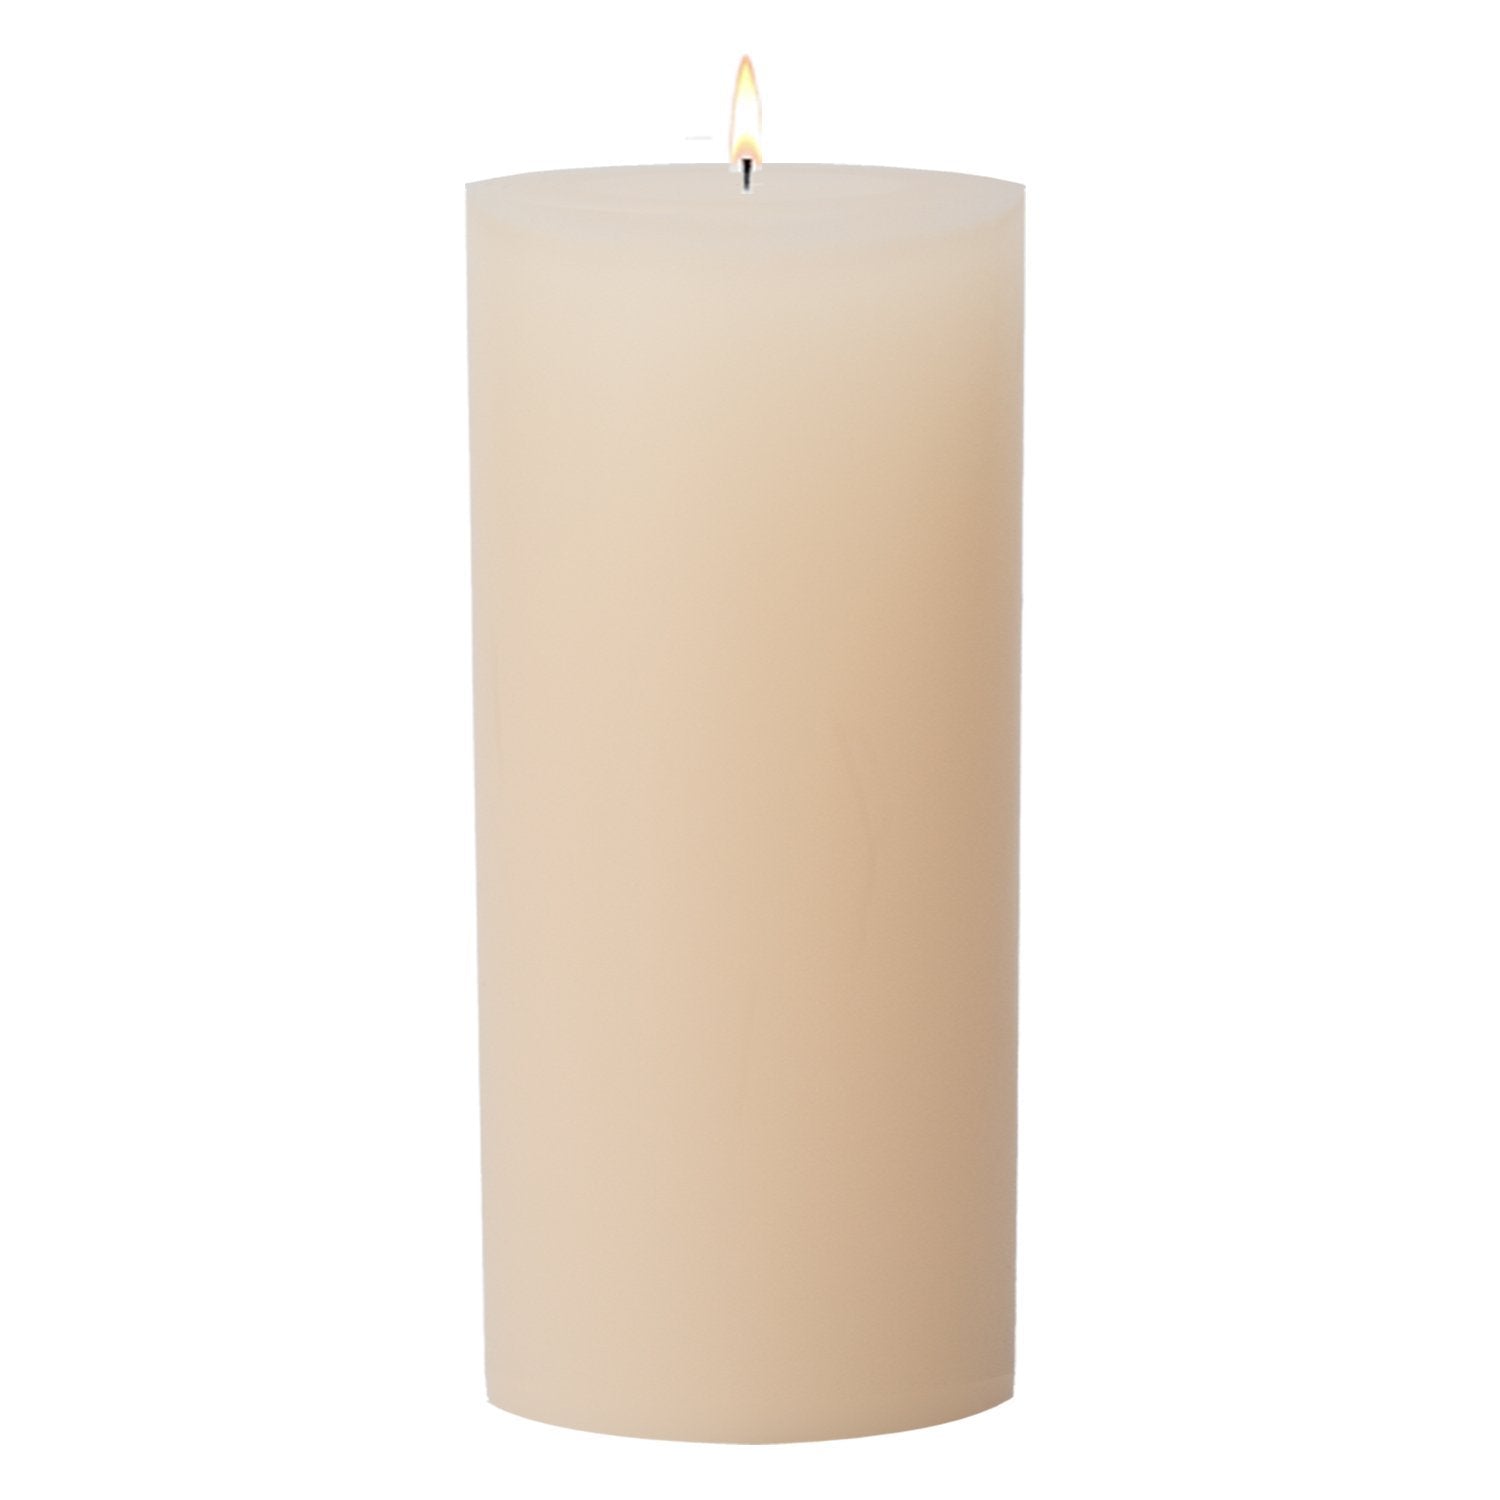 Stone Candles Unscented Pillar Ivory 4x9